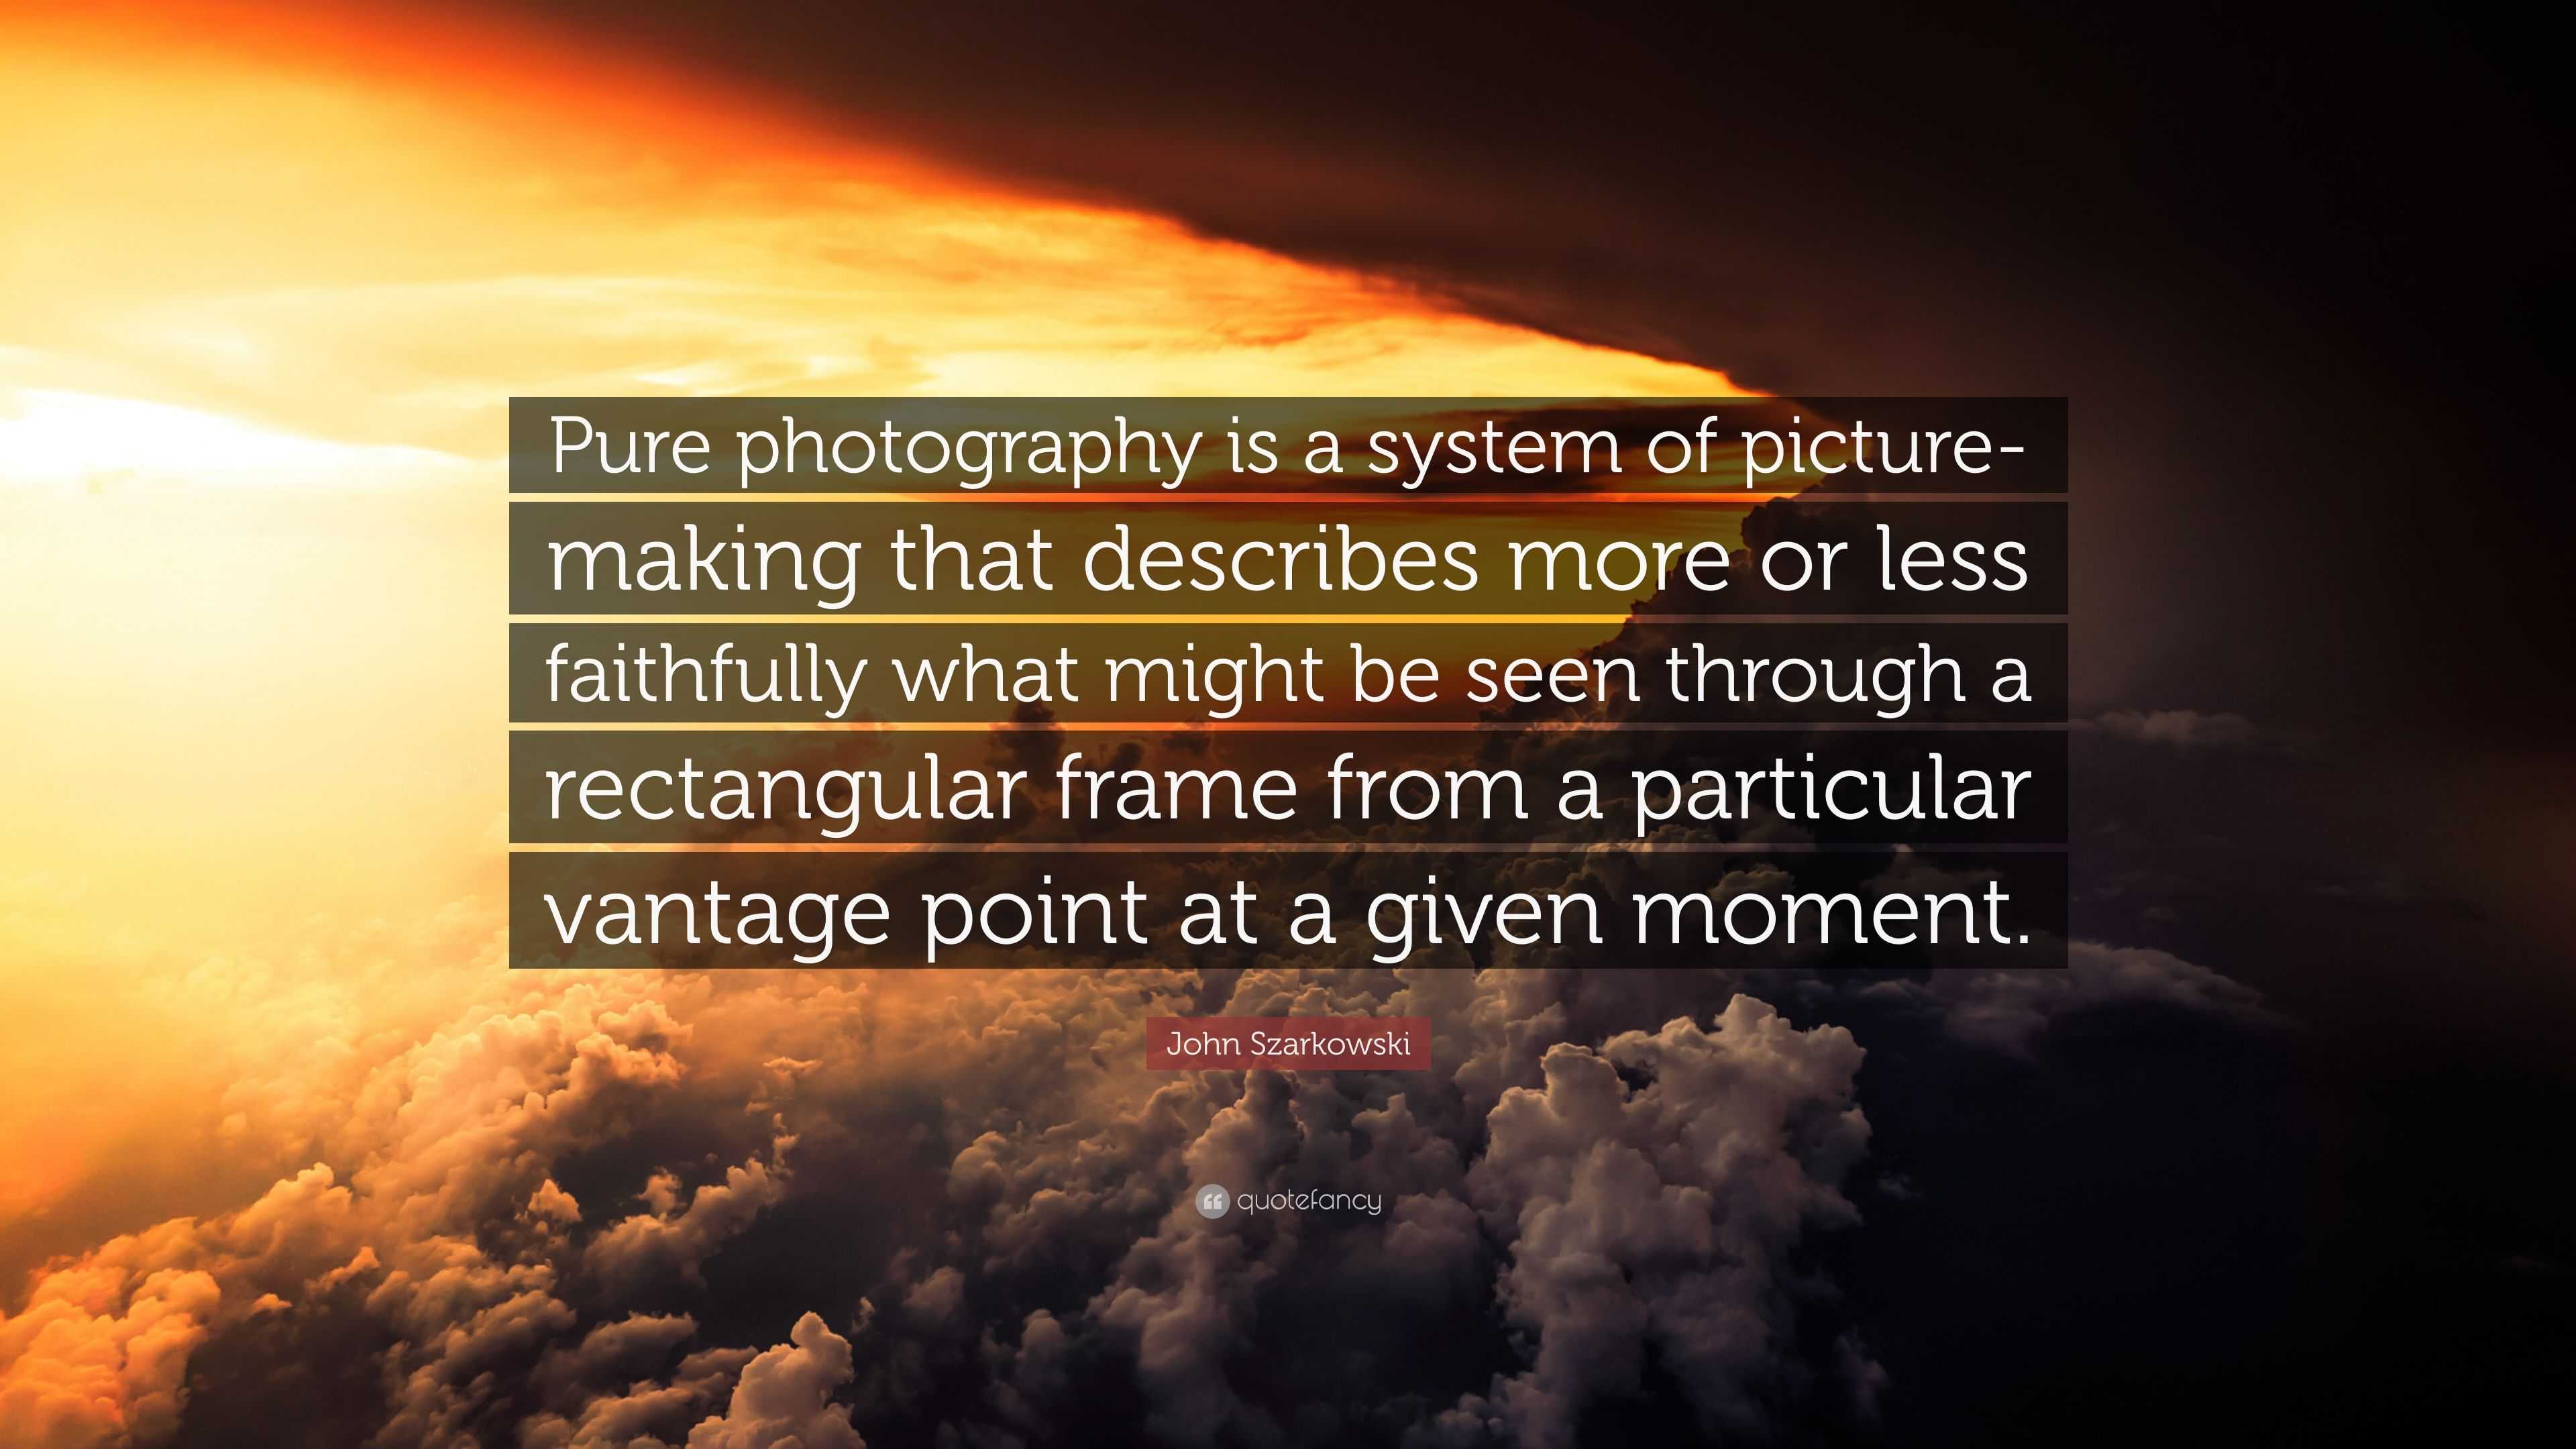 John Szarkowski Quote: “Pure photography is a system of picture-making ...